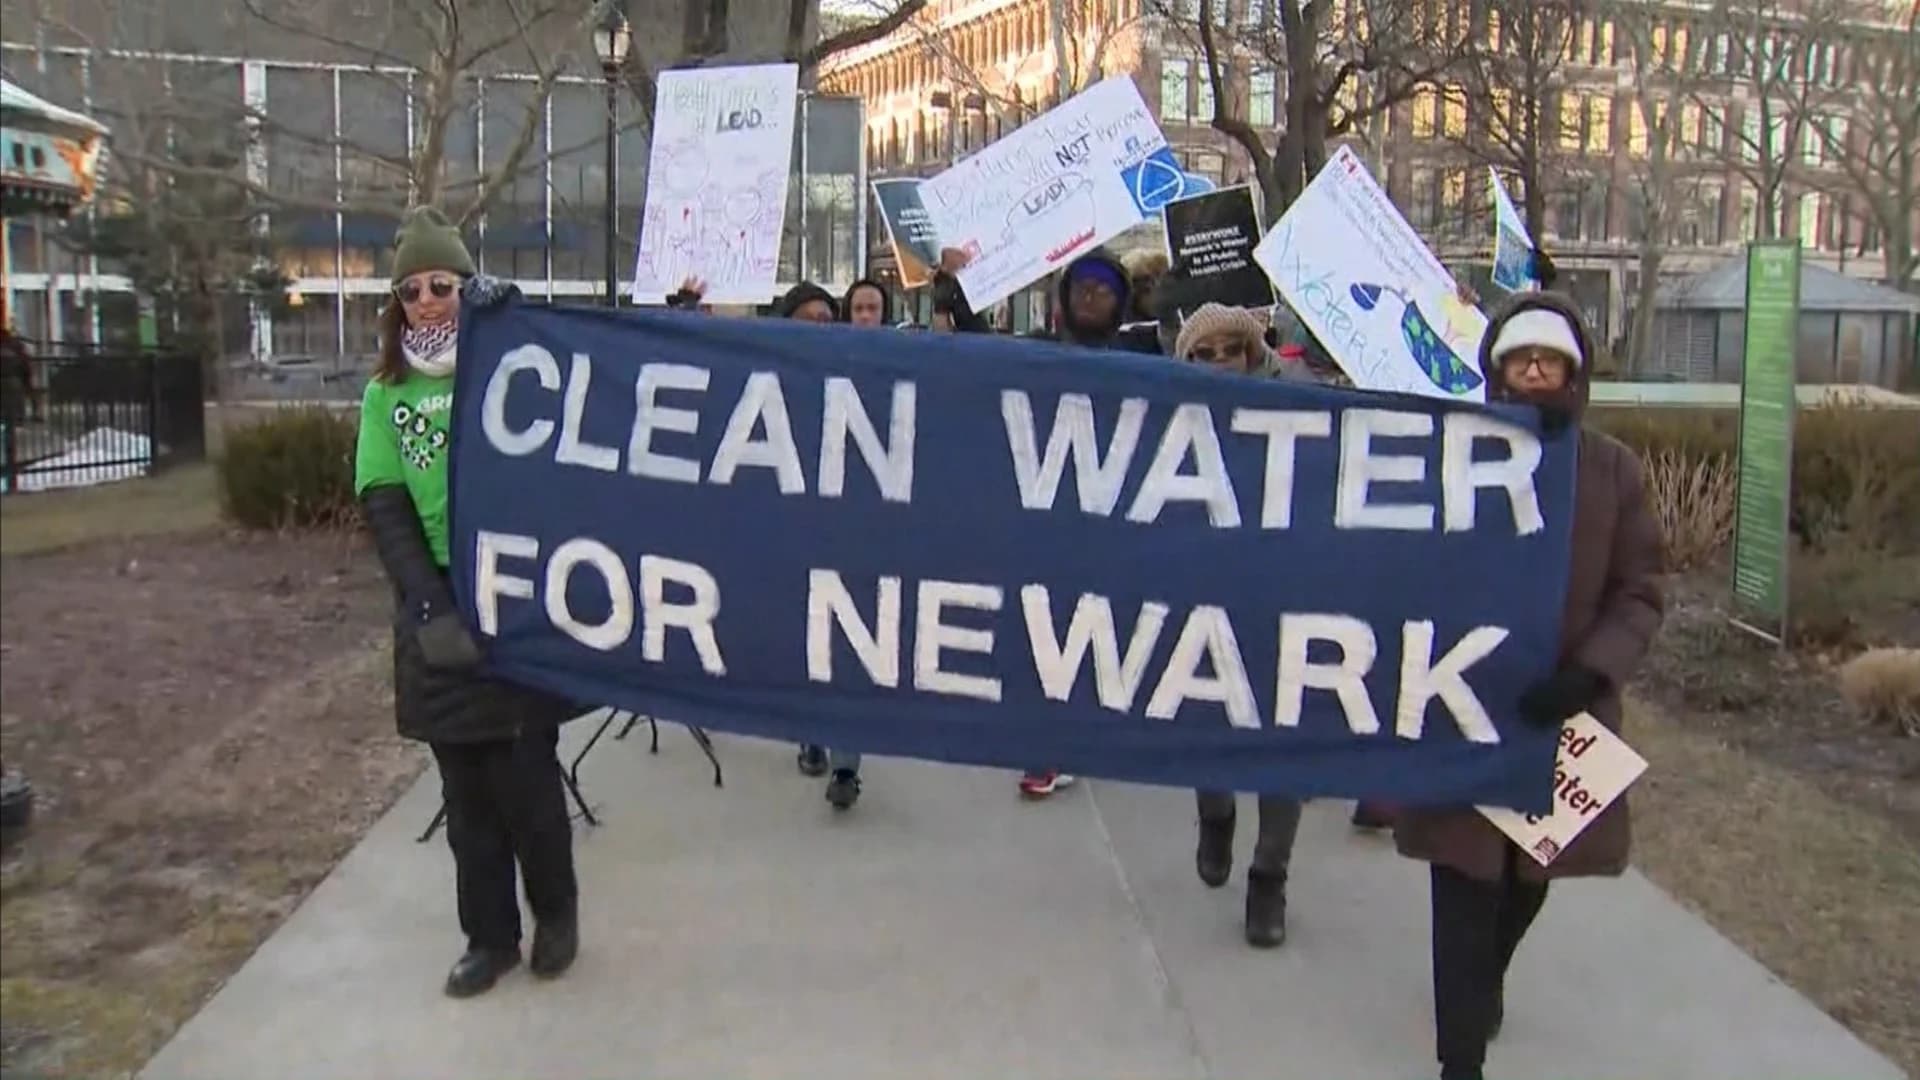 Newark residents hold rally, demand cleaner drinking water